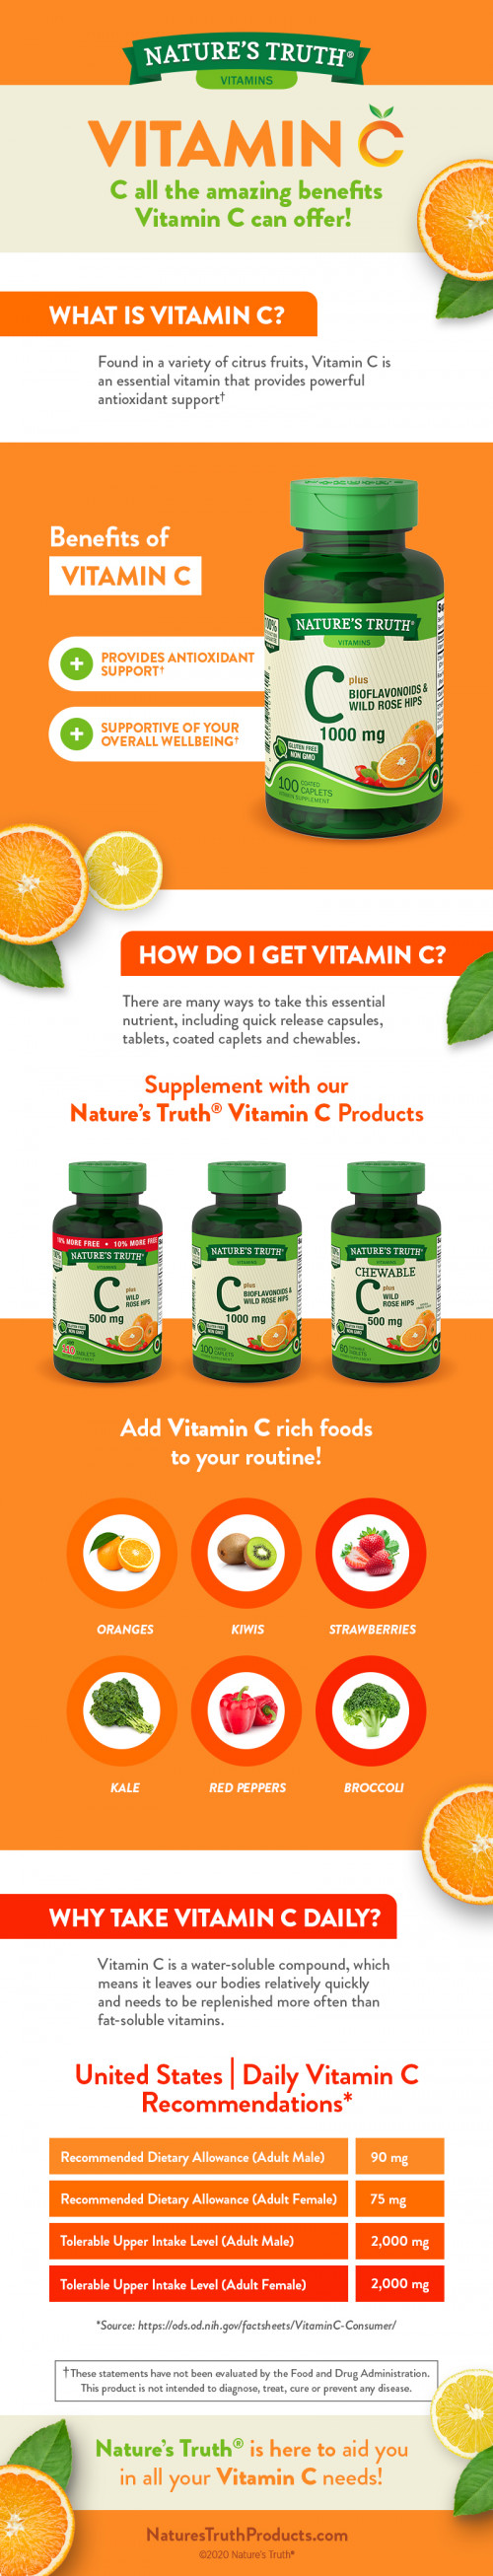 Visit us at - https://www.naturestruthproducts.com/supplements/vitamin-c/
Vitamin C is a water-soluble compound, which means it leaves our bodies relatively quickly and needs to be replenished more often than fat-soluble vitamins.